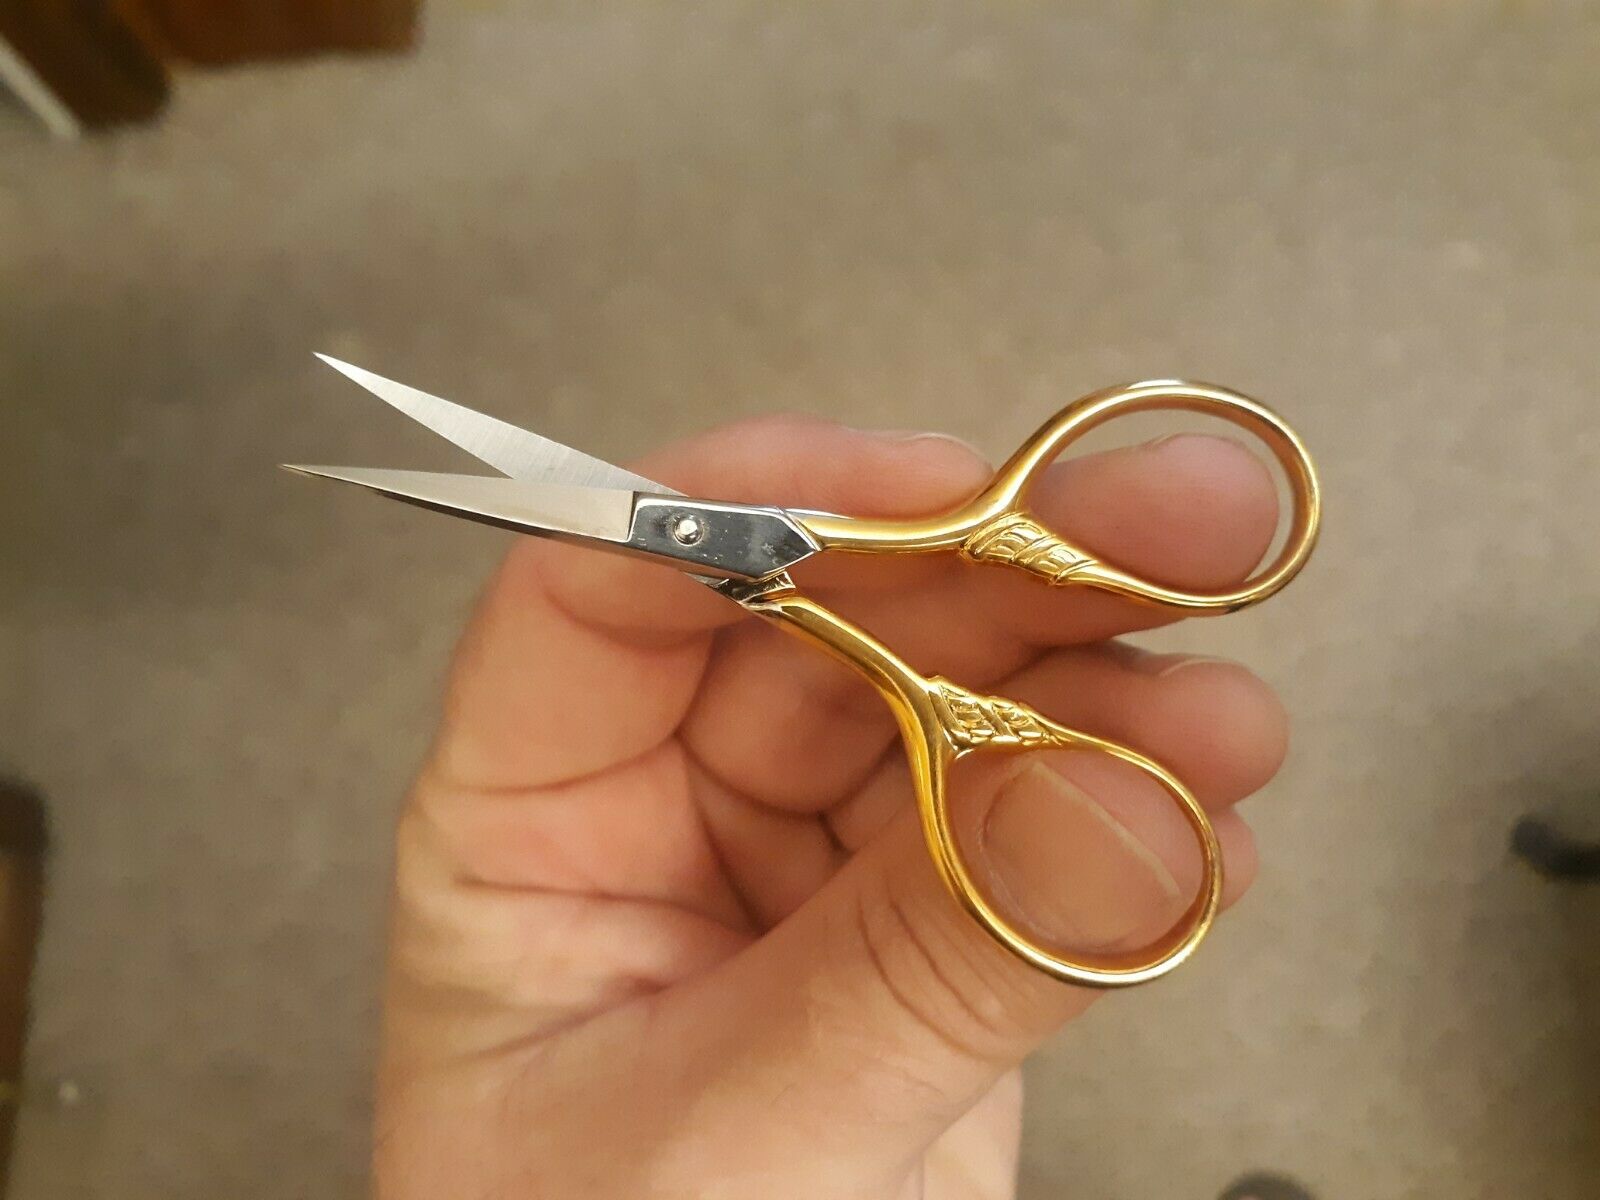 Gingher 3 1/2" Lions Tail Embroidery Scissors